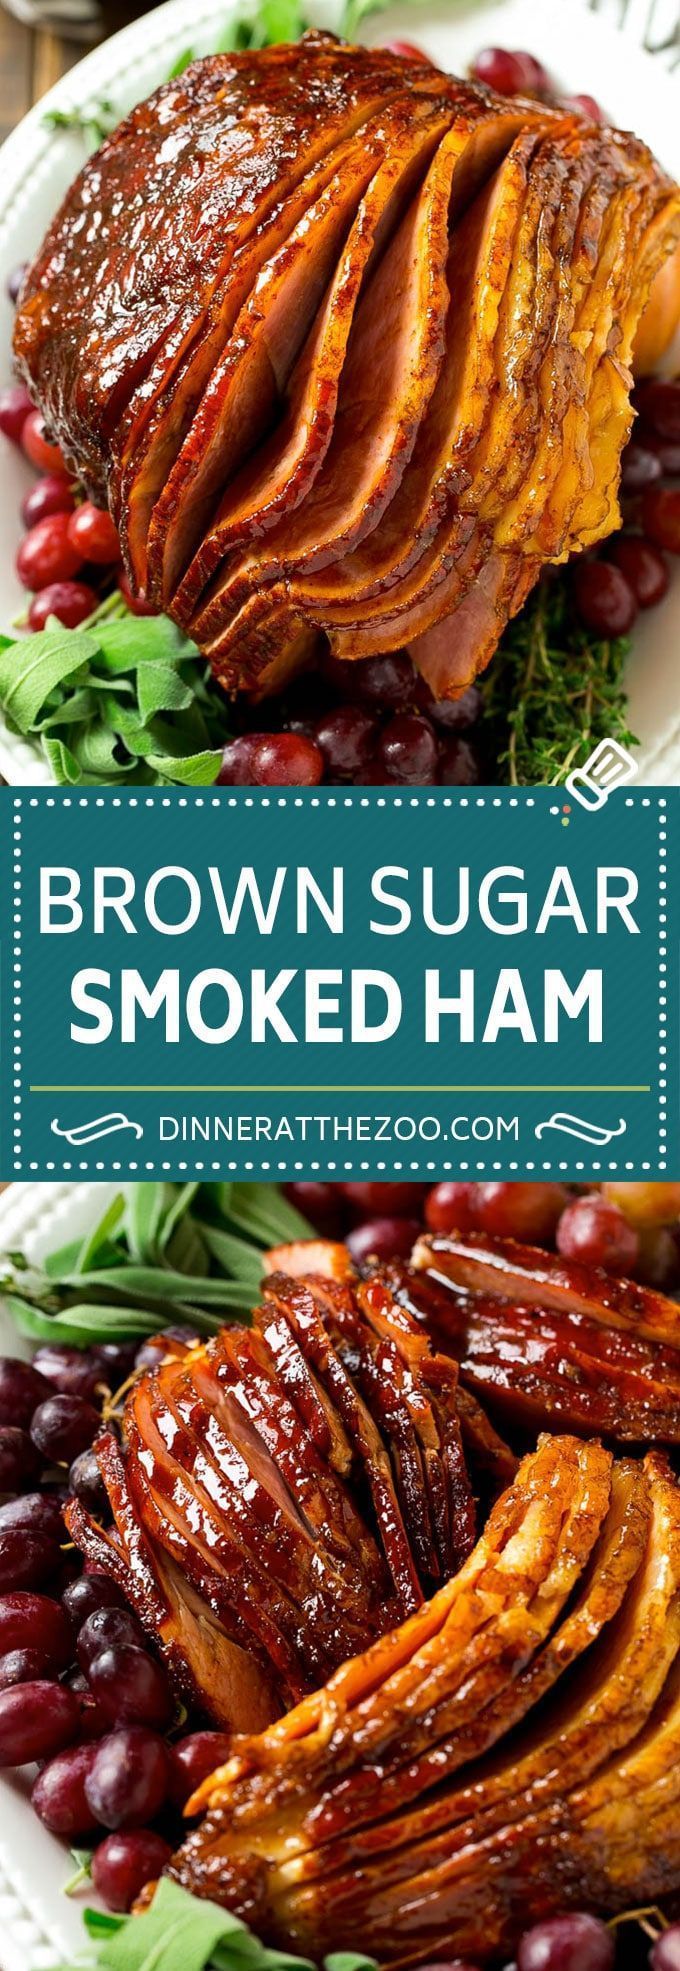 Smoked Ham with Brown Sugar Glaze - Dinner at the Zoo -   21 healthy recipes For Two brown sugar ideas